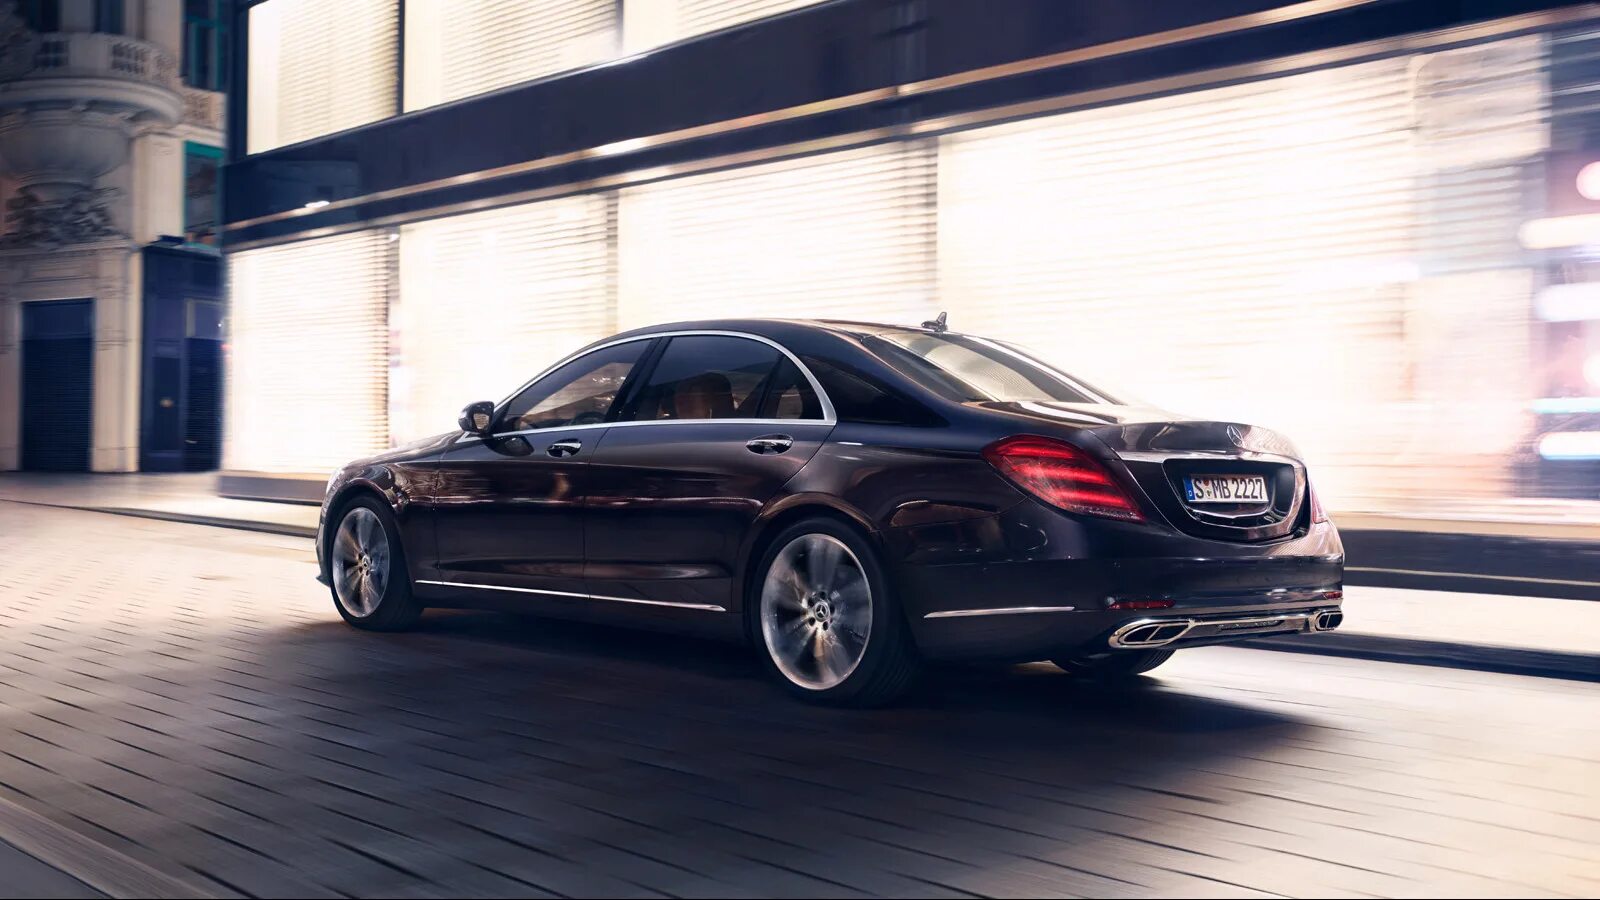 Mercedes s450. Mercedes Benz s450 4matic. Мерседес-Бенц s класс 2019. Мерседес-Бенц s400 4 matic. Mercedes s class 4 matic.